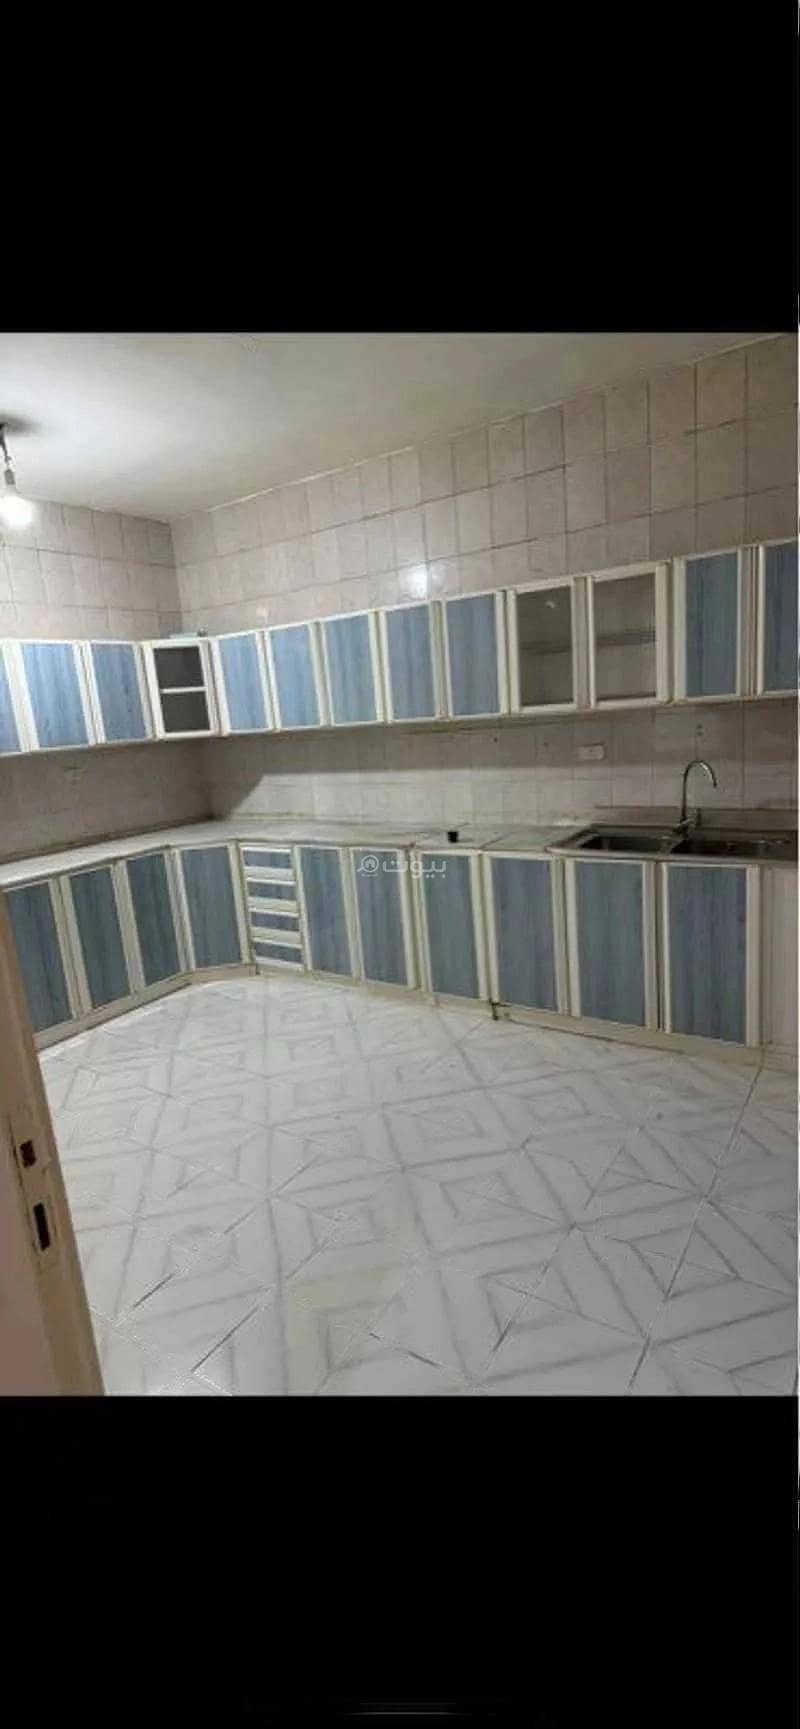 4 Rooms Apartment For Rent - Prince Mutab Street, Jeddah